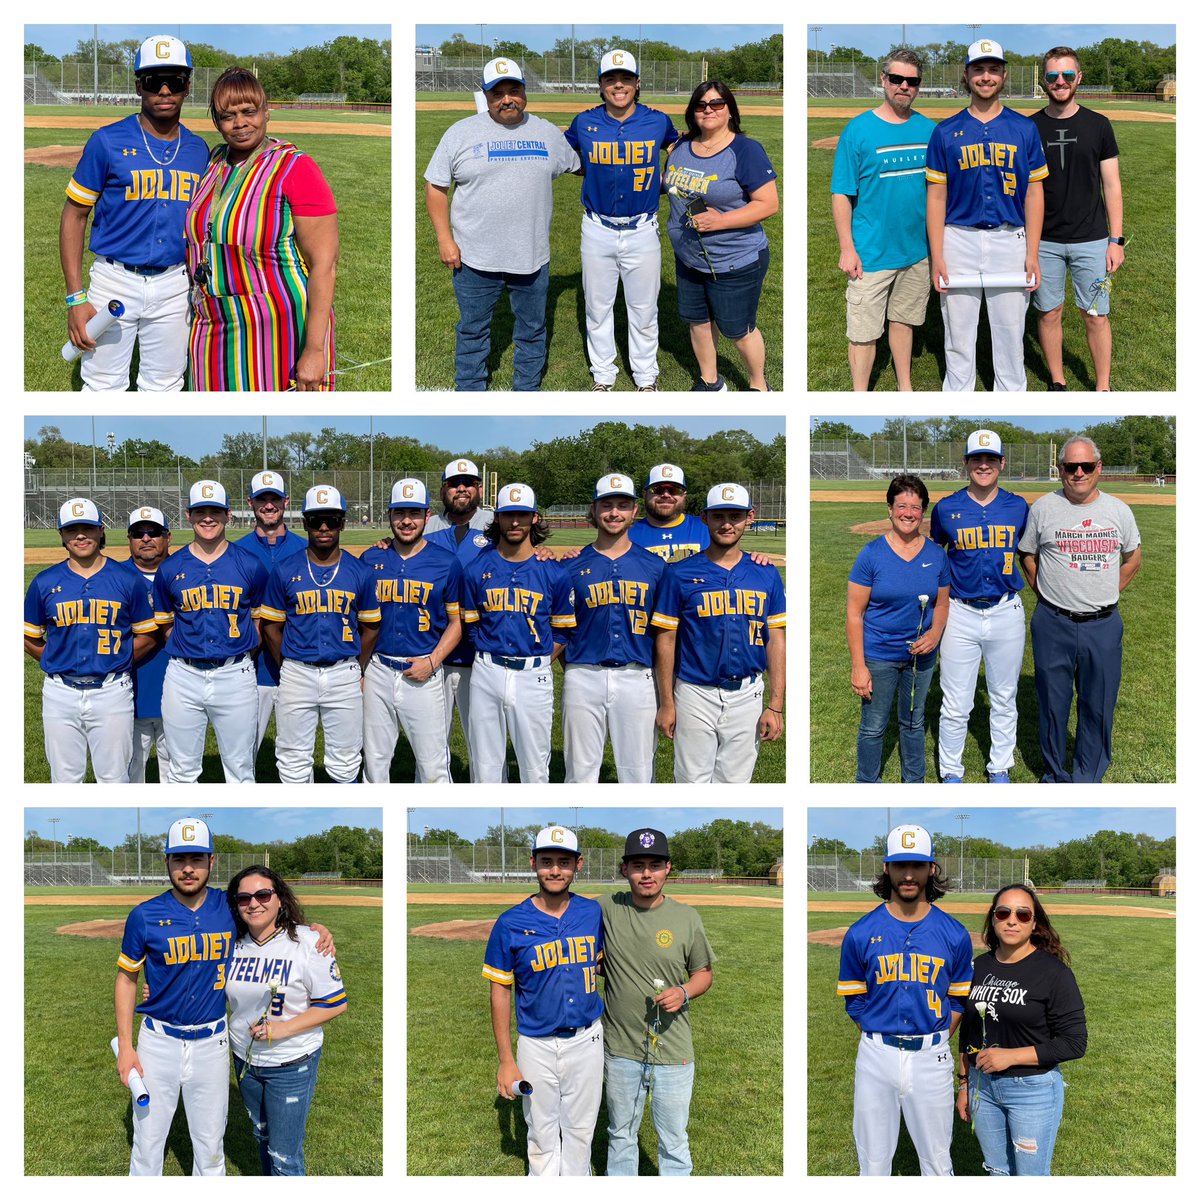 Senior day! A heartfelt thank you to these seven Steelmen and their families for the dedication and loyalty they have given over the past four years. Each of them is going to do great things in this world. #steelmenpride